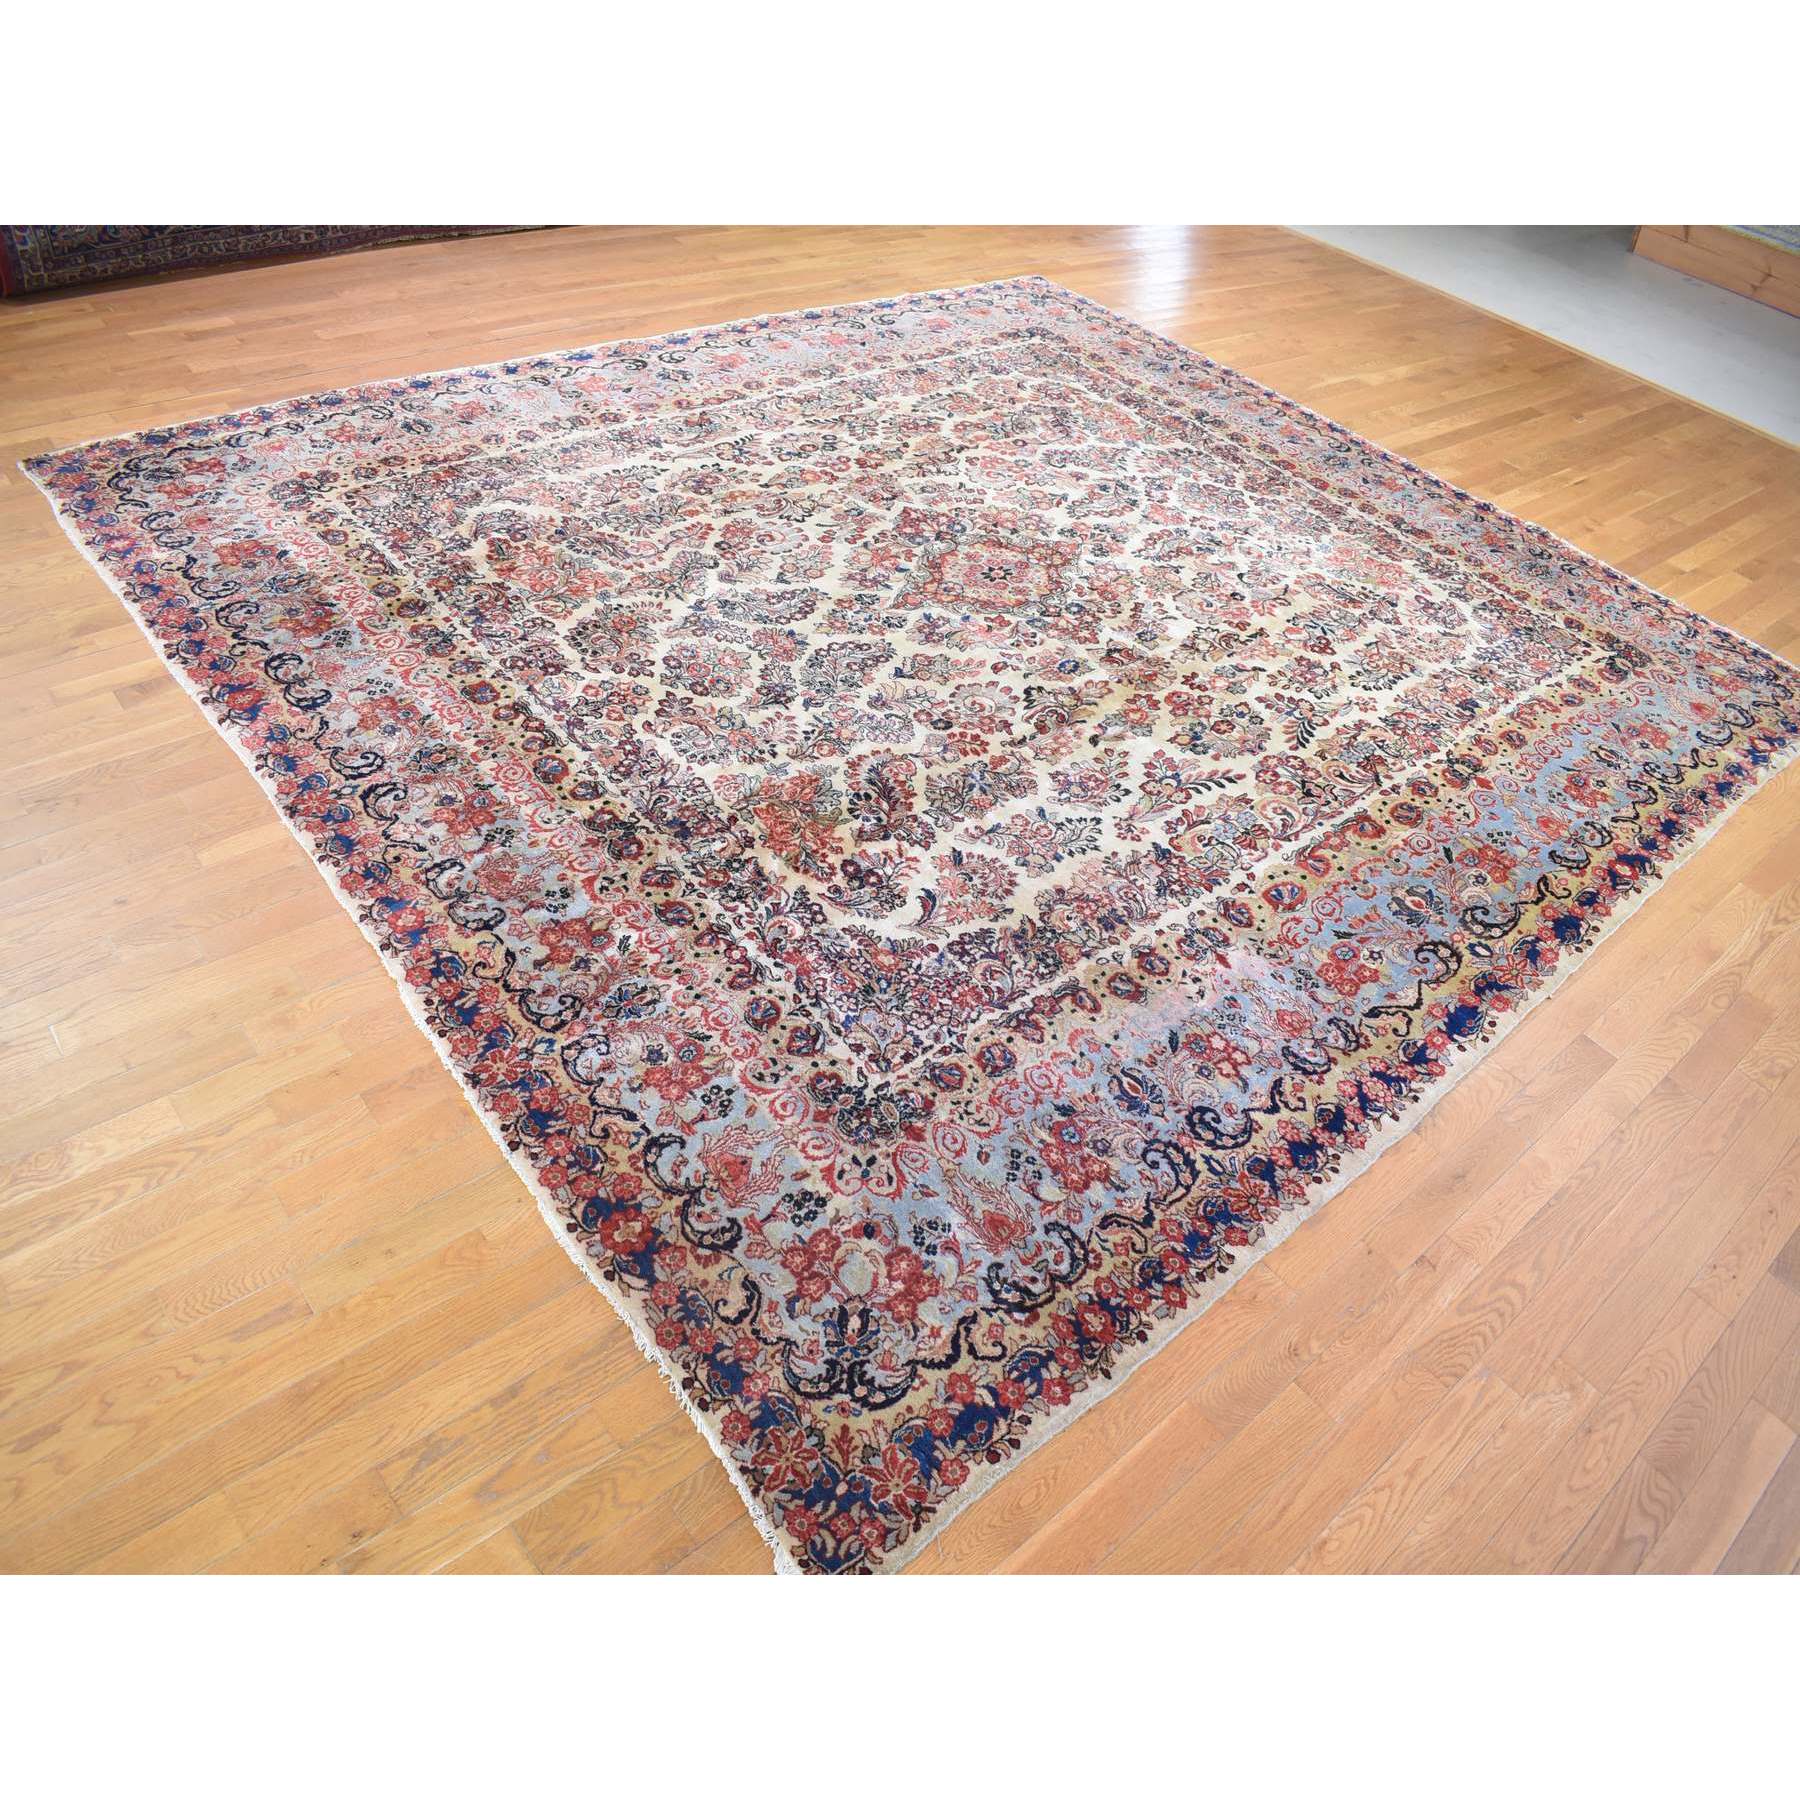 12'x13'4" Ivory, Antique Persian Sarouk Full Pile Clean and Soft, Pure Wool, Thick and Plush, Hand Woven, Squarish Oriental Rug 